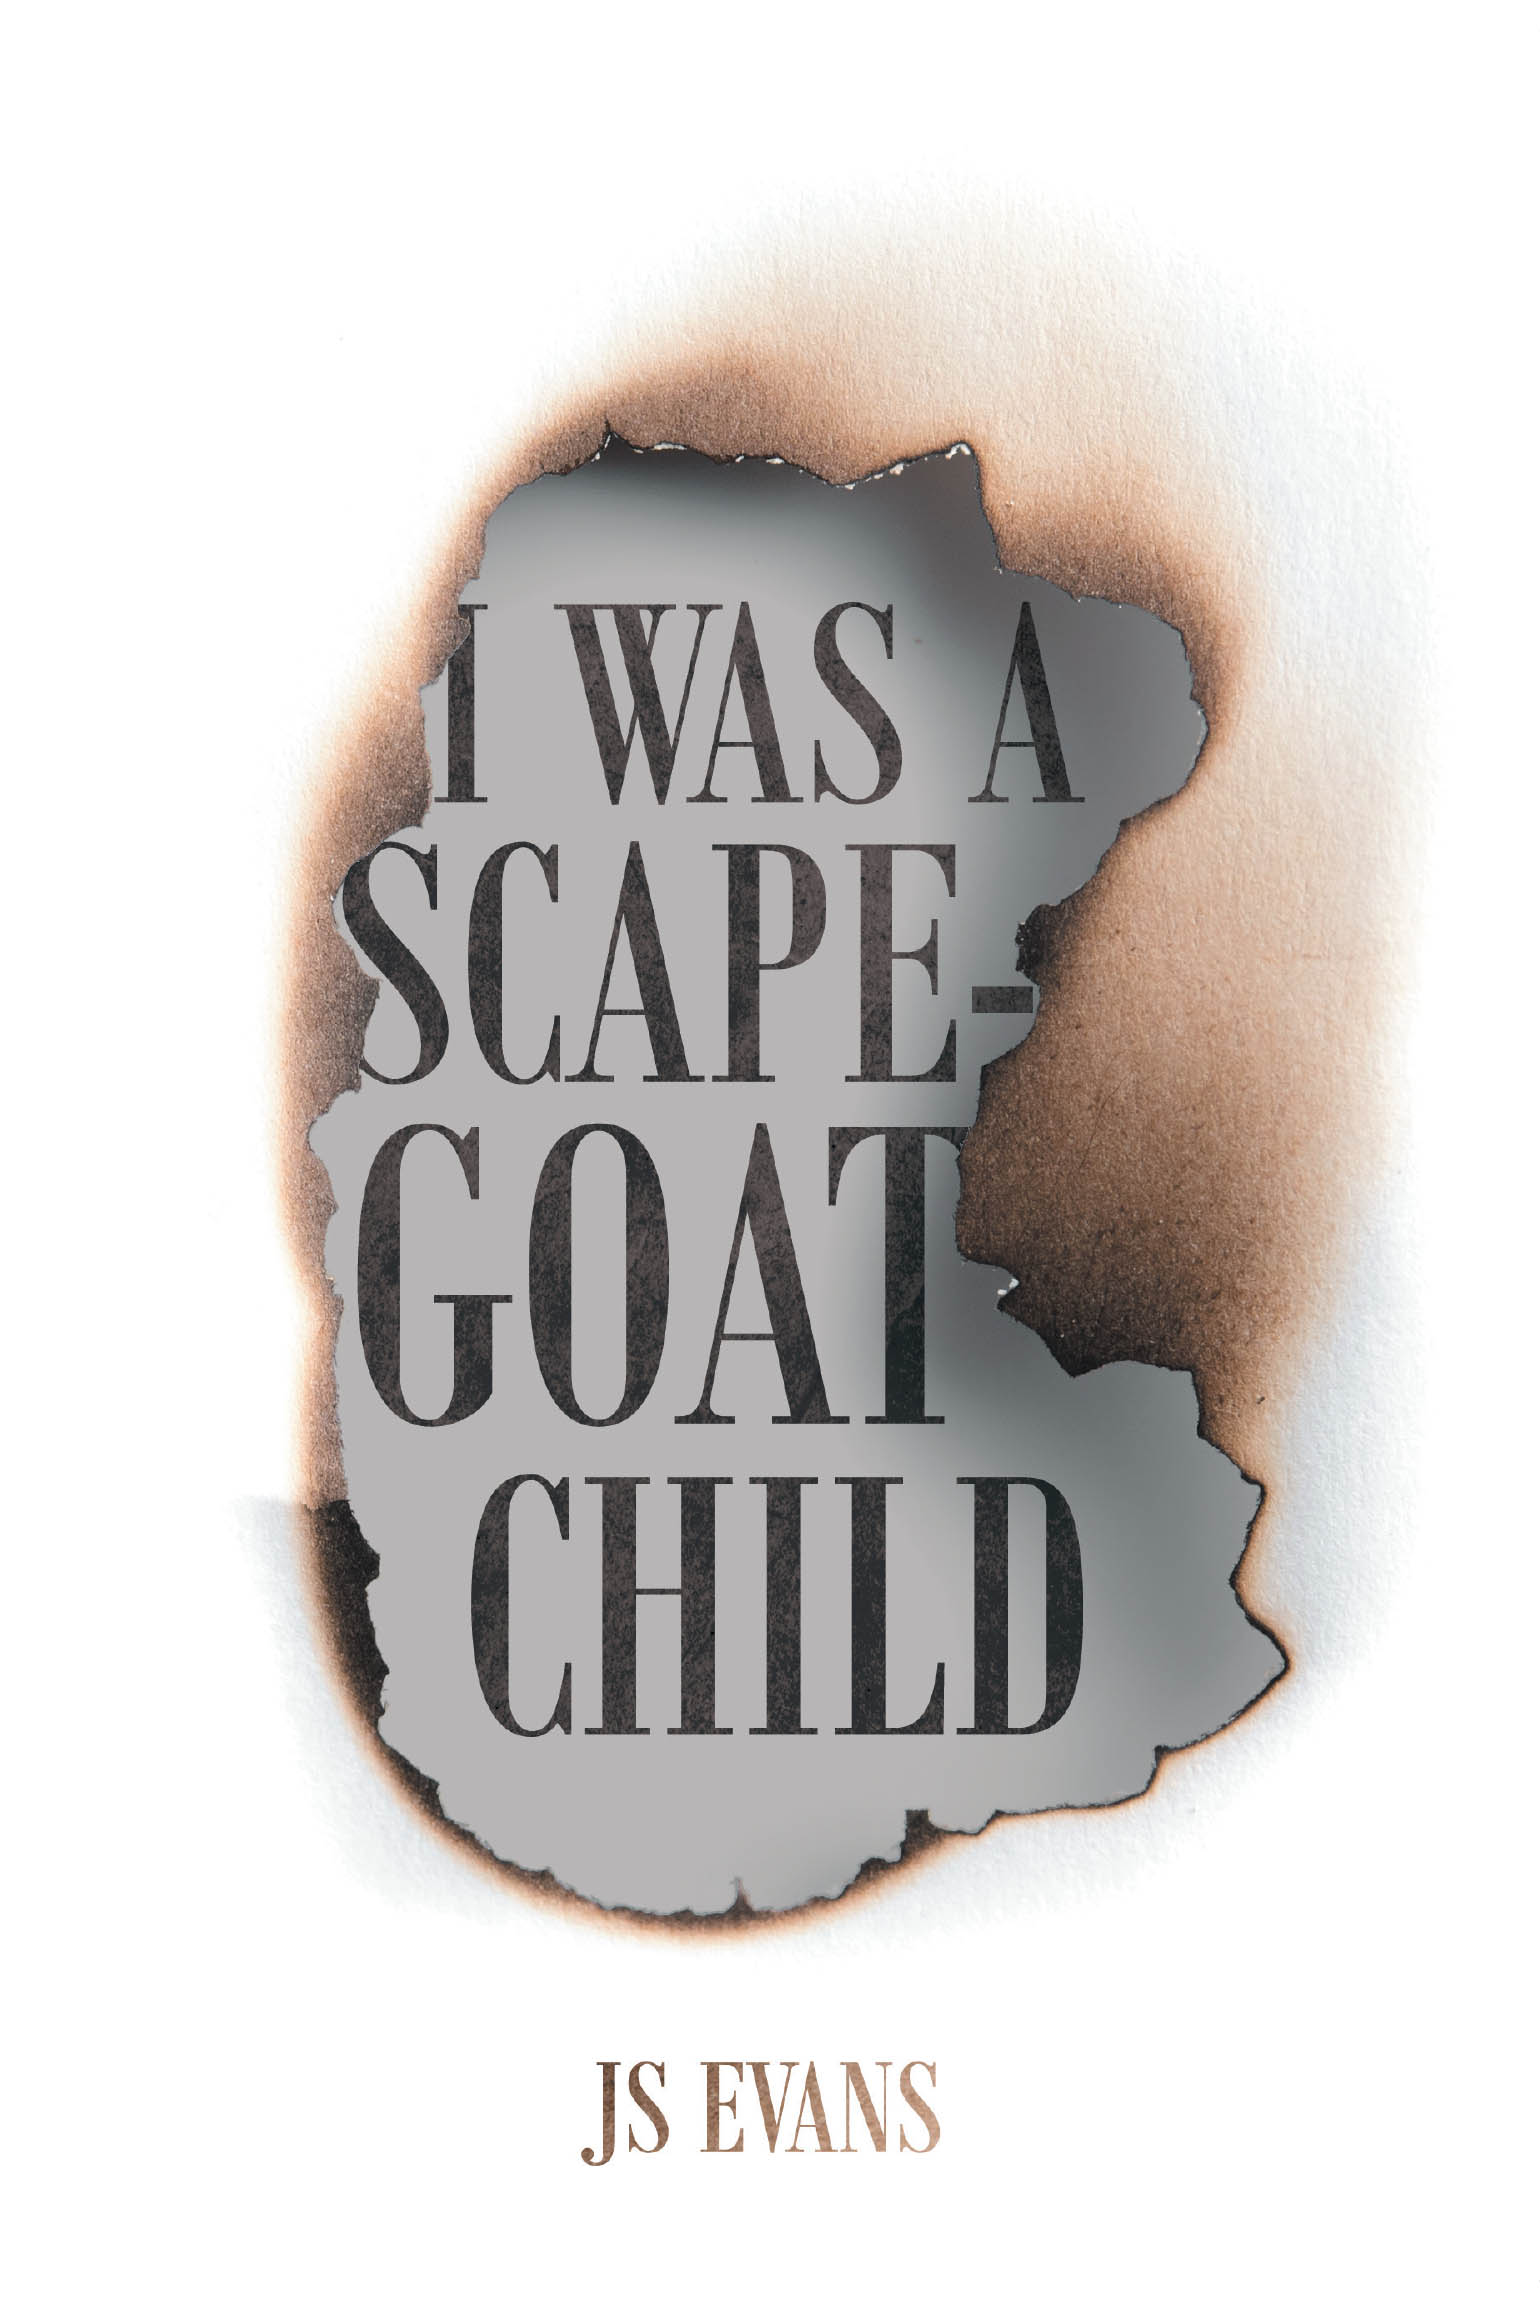 Author JS Evans’s New Book, “I Was a Scapegoat Child,” is a Thought-Provoking Memoir That Explores the Lasting Effects Child Abuse Can Have on a Person's Life